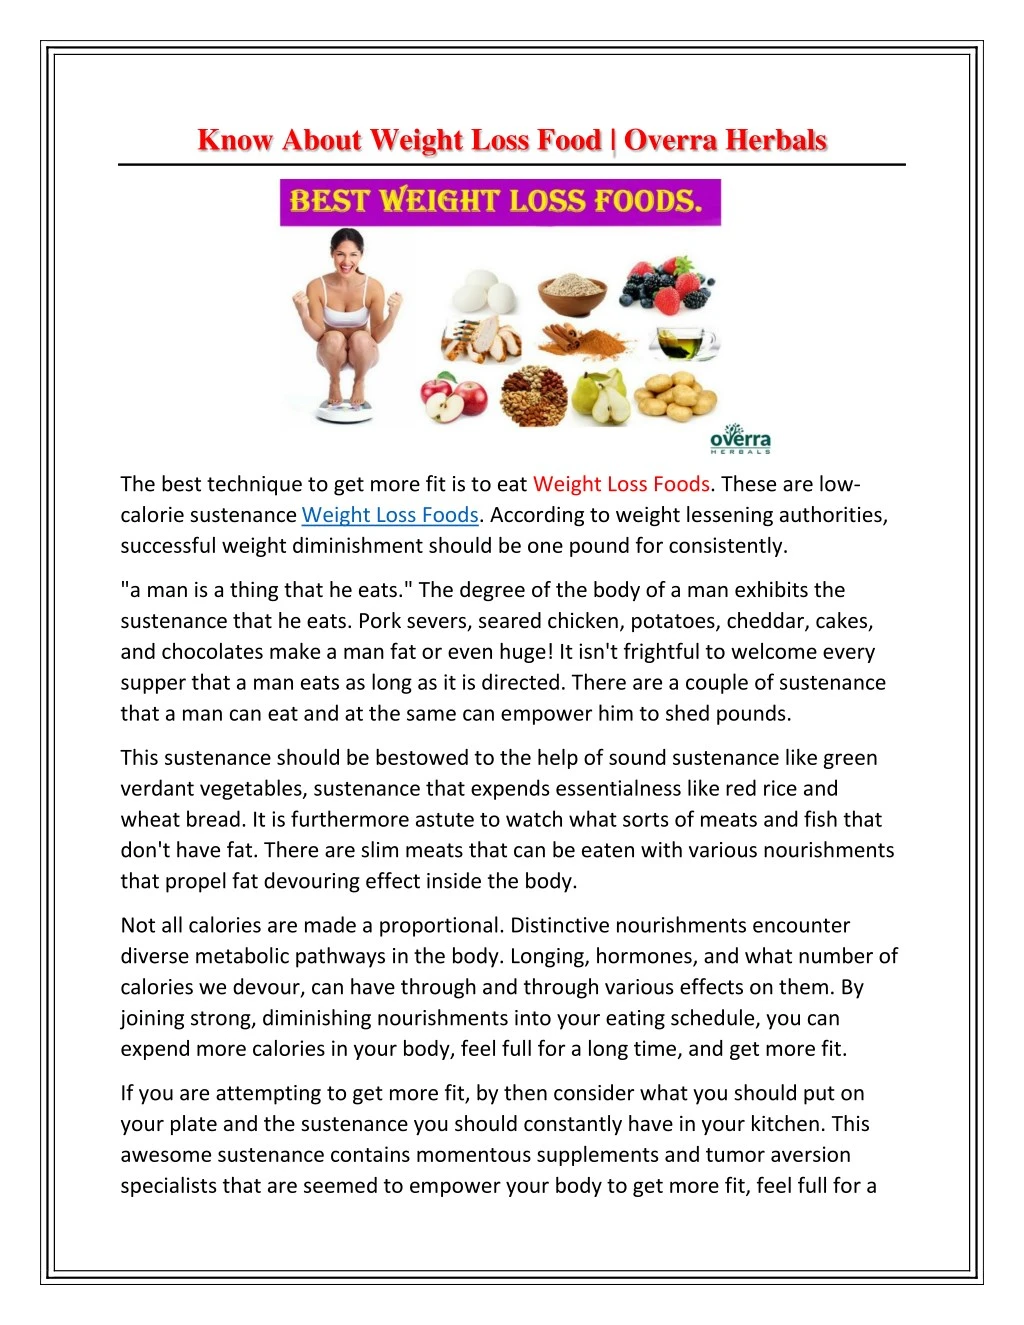 know about weight loss food overra herbals n.